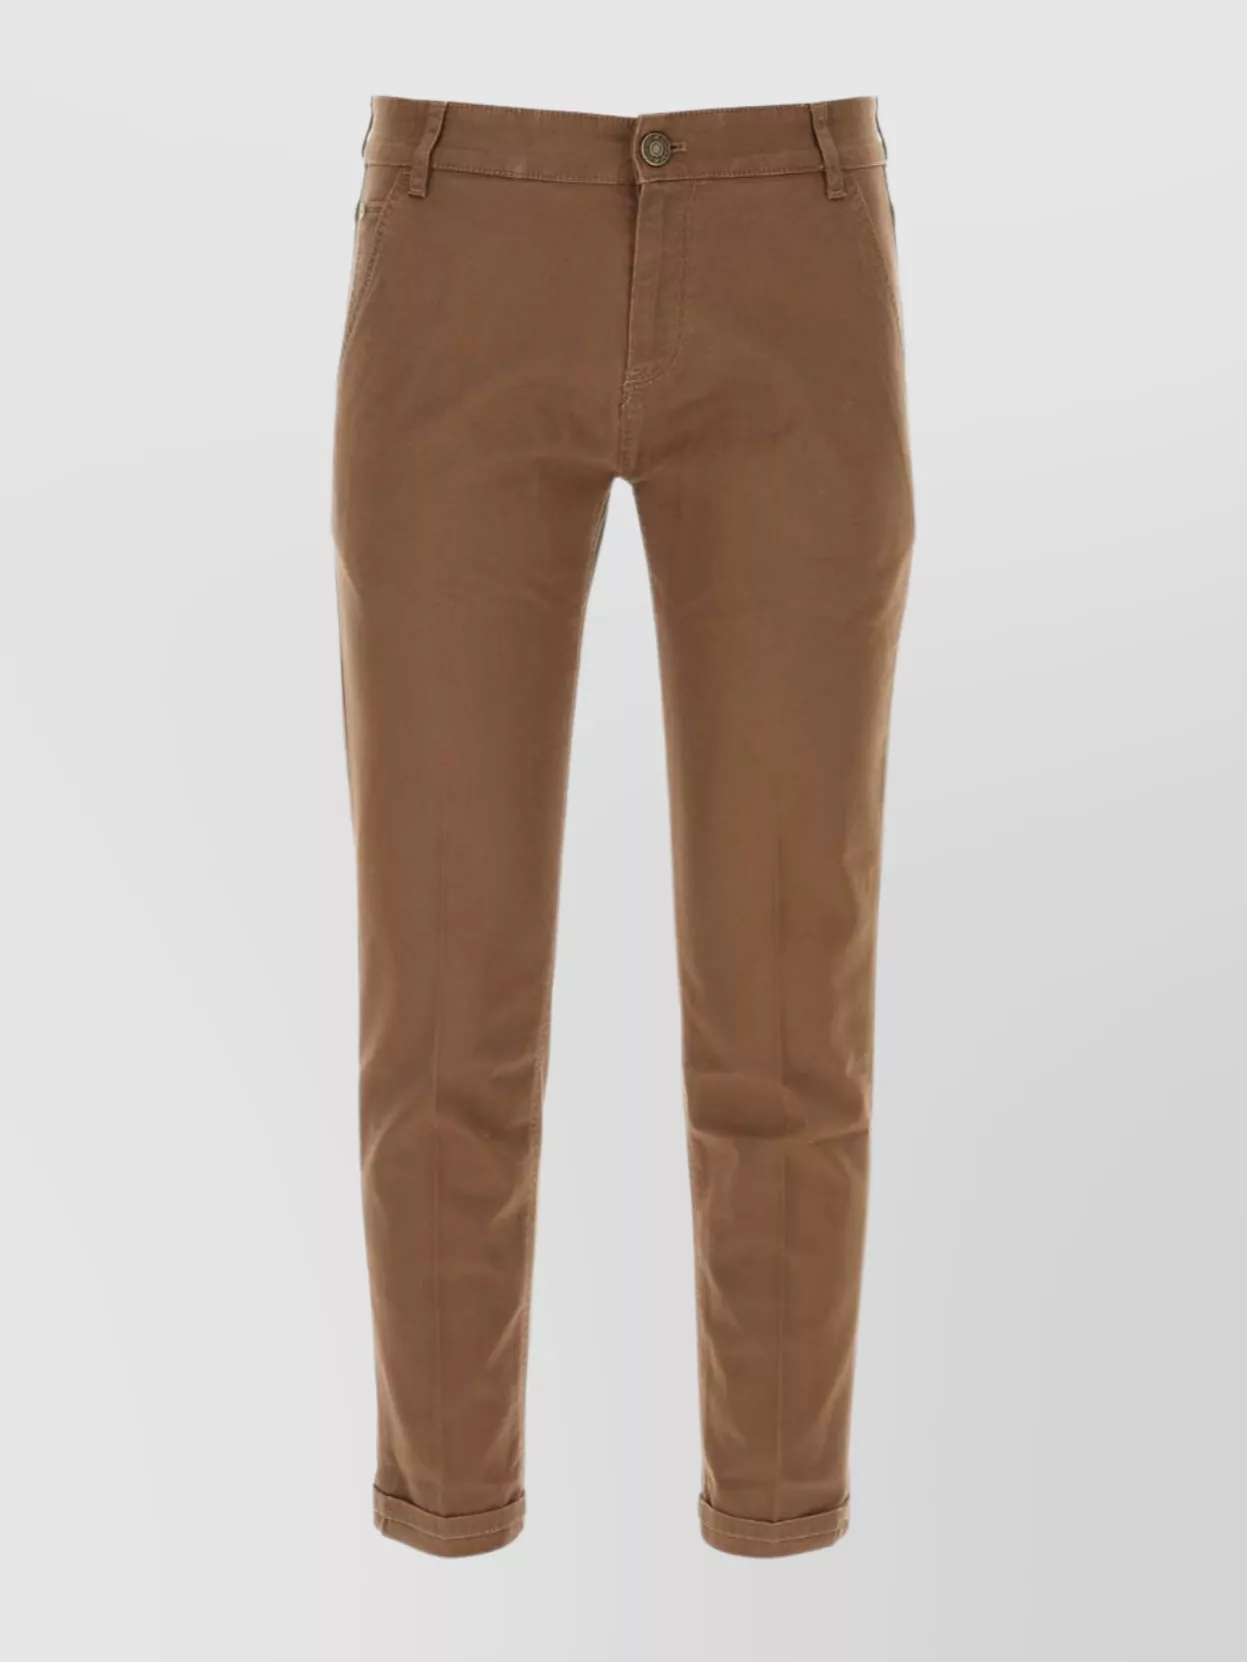 Shop Pt Torino Stretch Denim Trousers With Back Pockets And Belt Loops